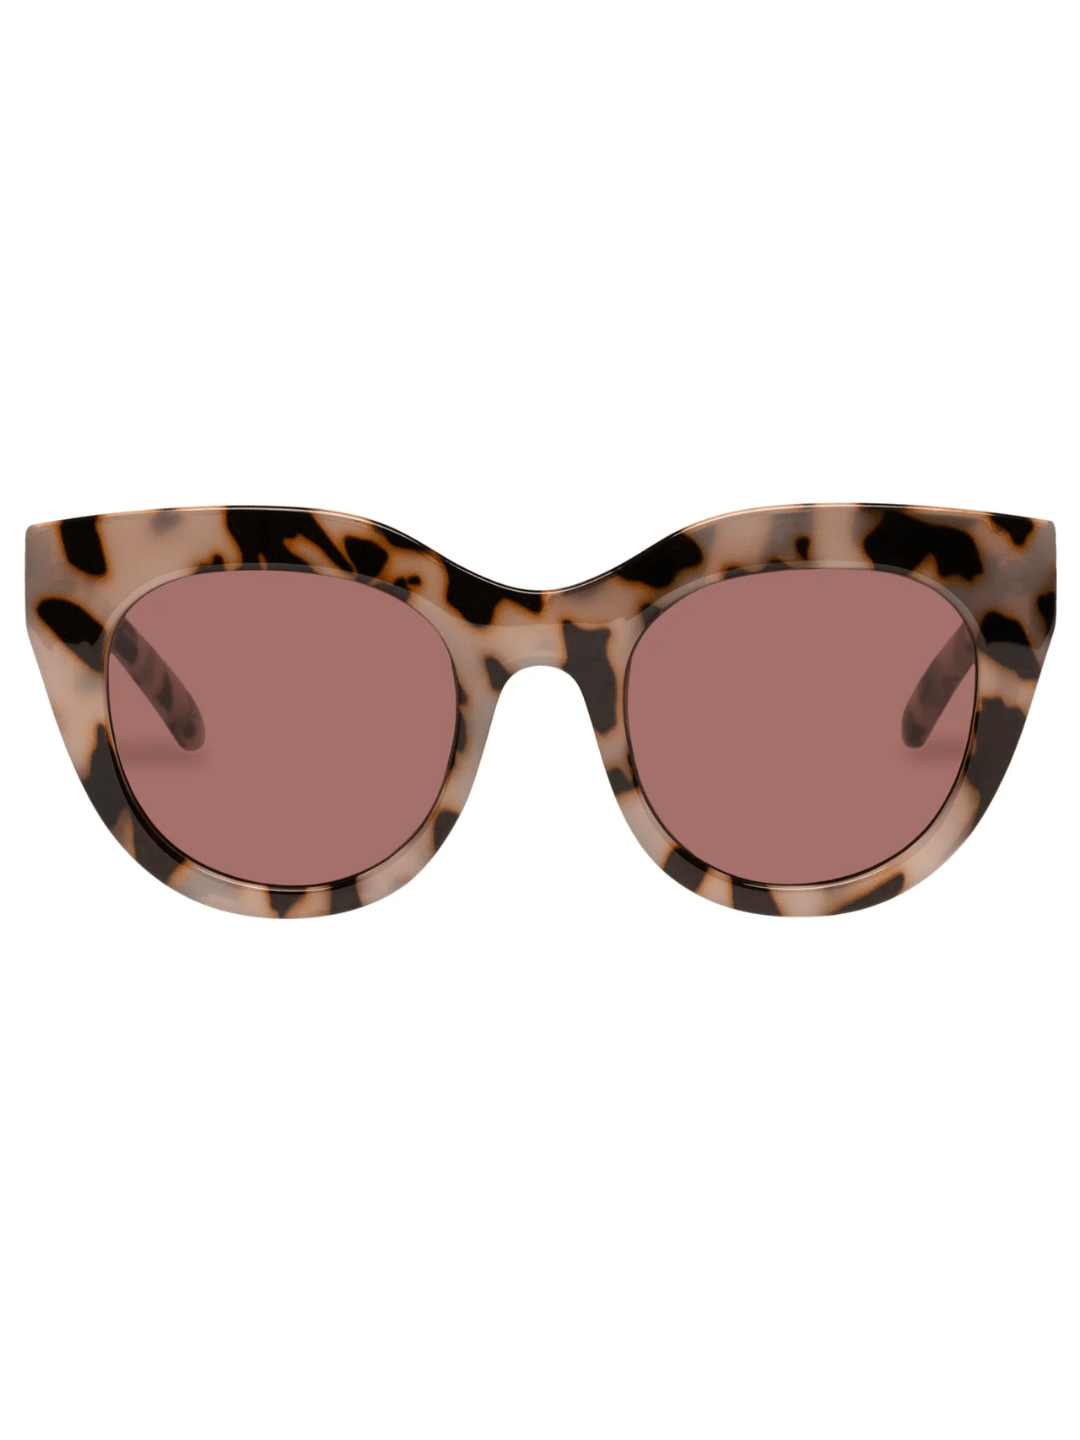 Le Specs Sunglasses Air Heart in Cookie Tort